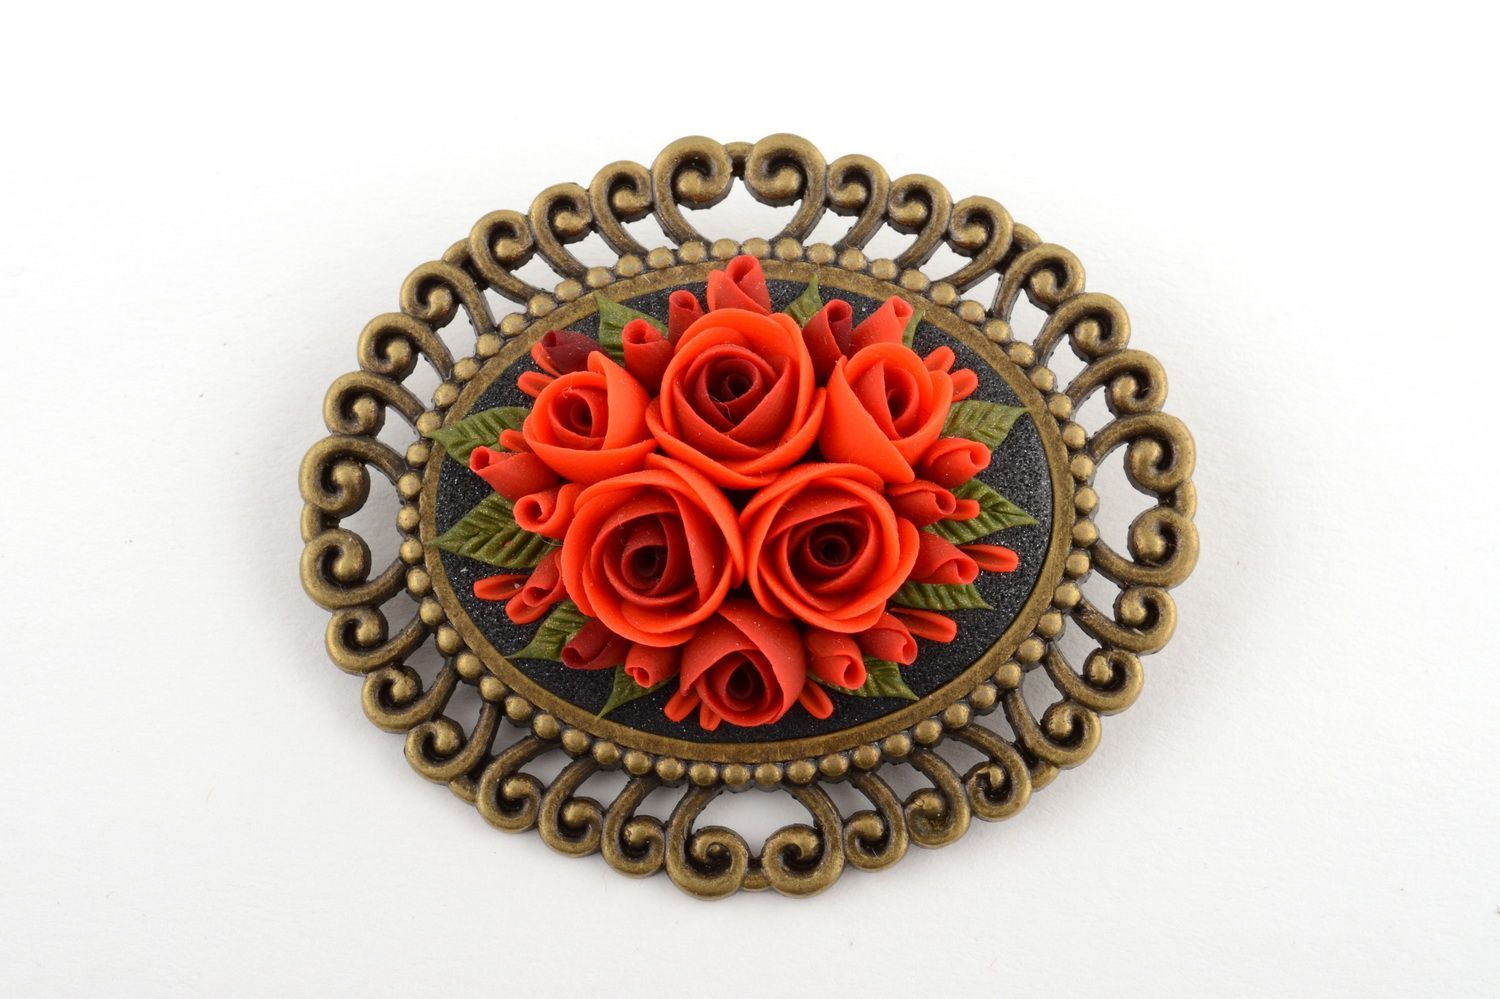 Handmade volume festive vintage brooch with cameo in shape of red roses photo 2